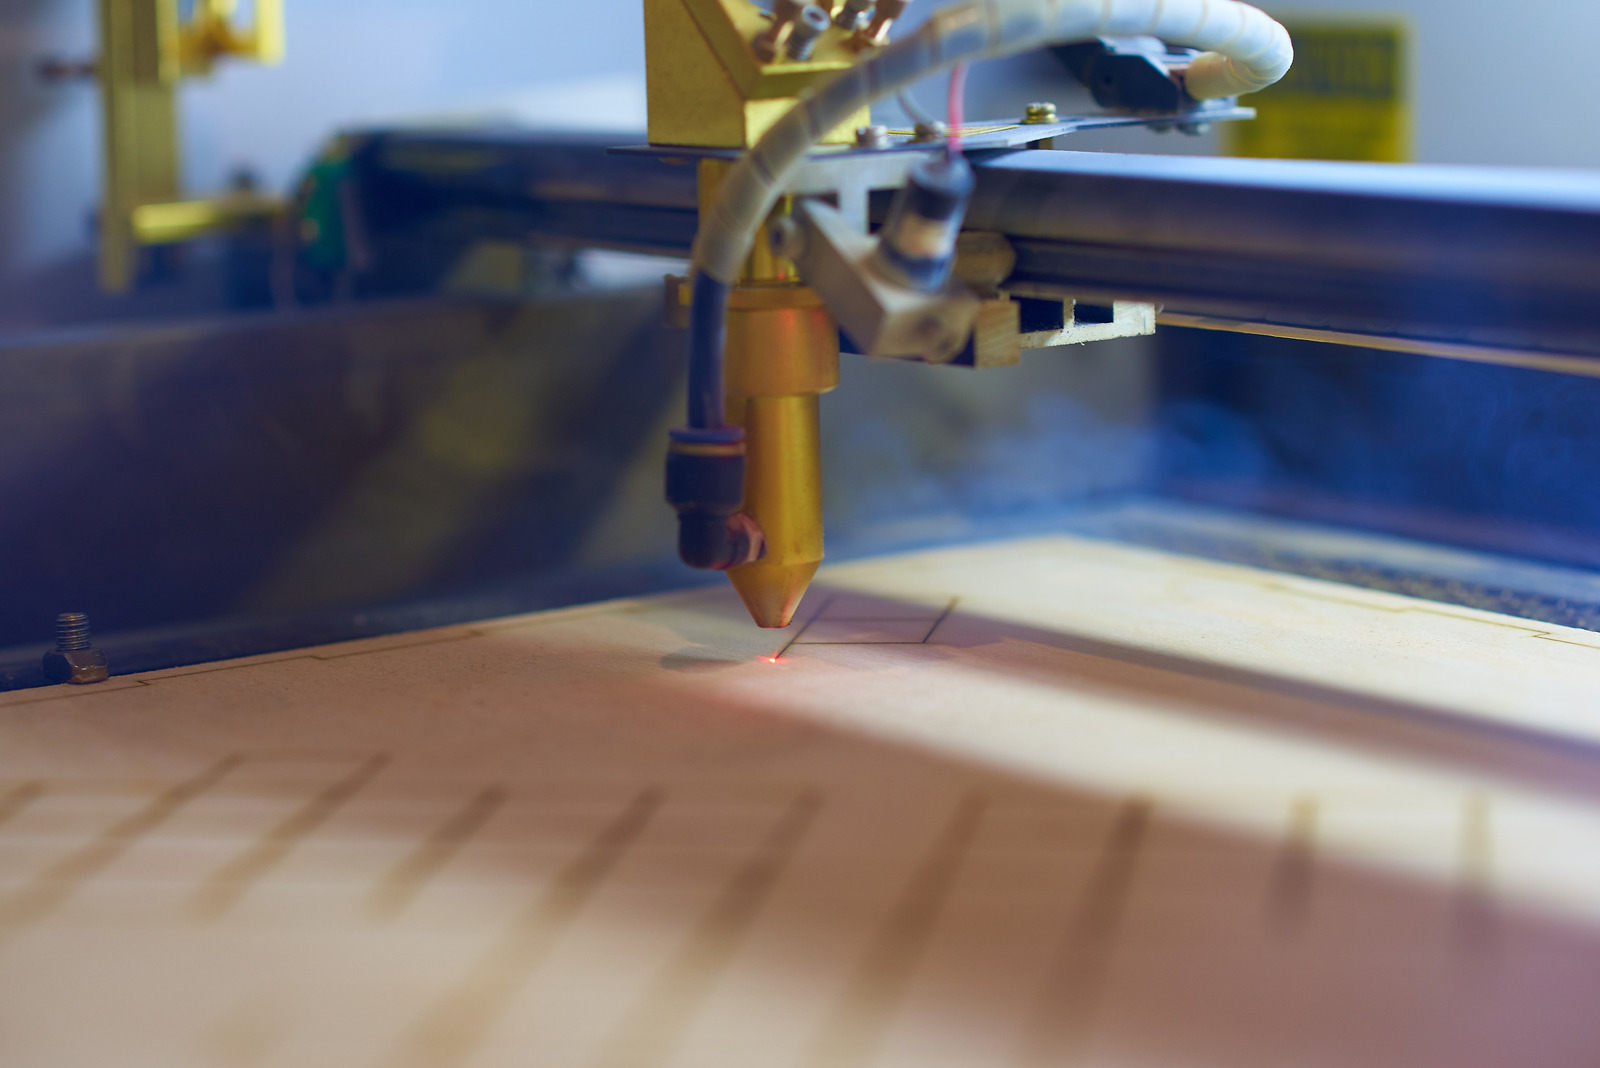 How to Choose the Best Laser Cutting and Engraving Machine for Your Business